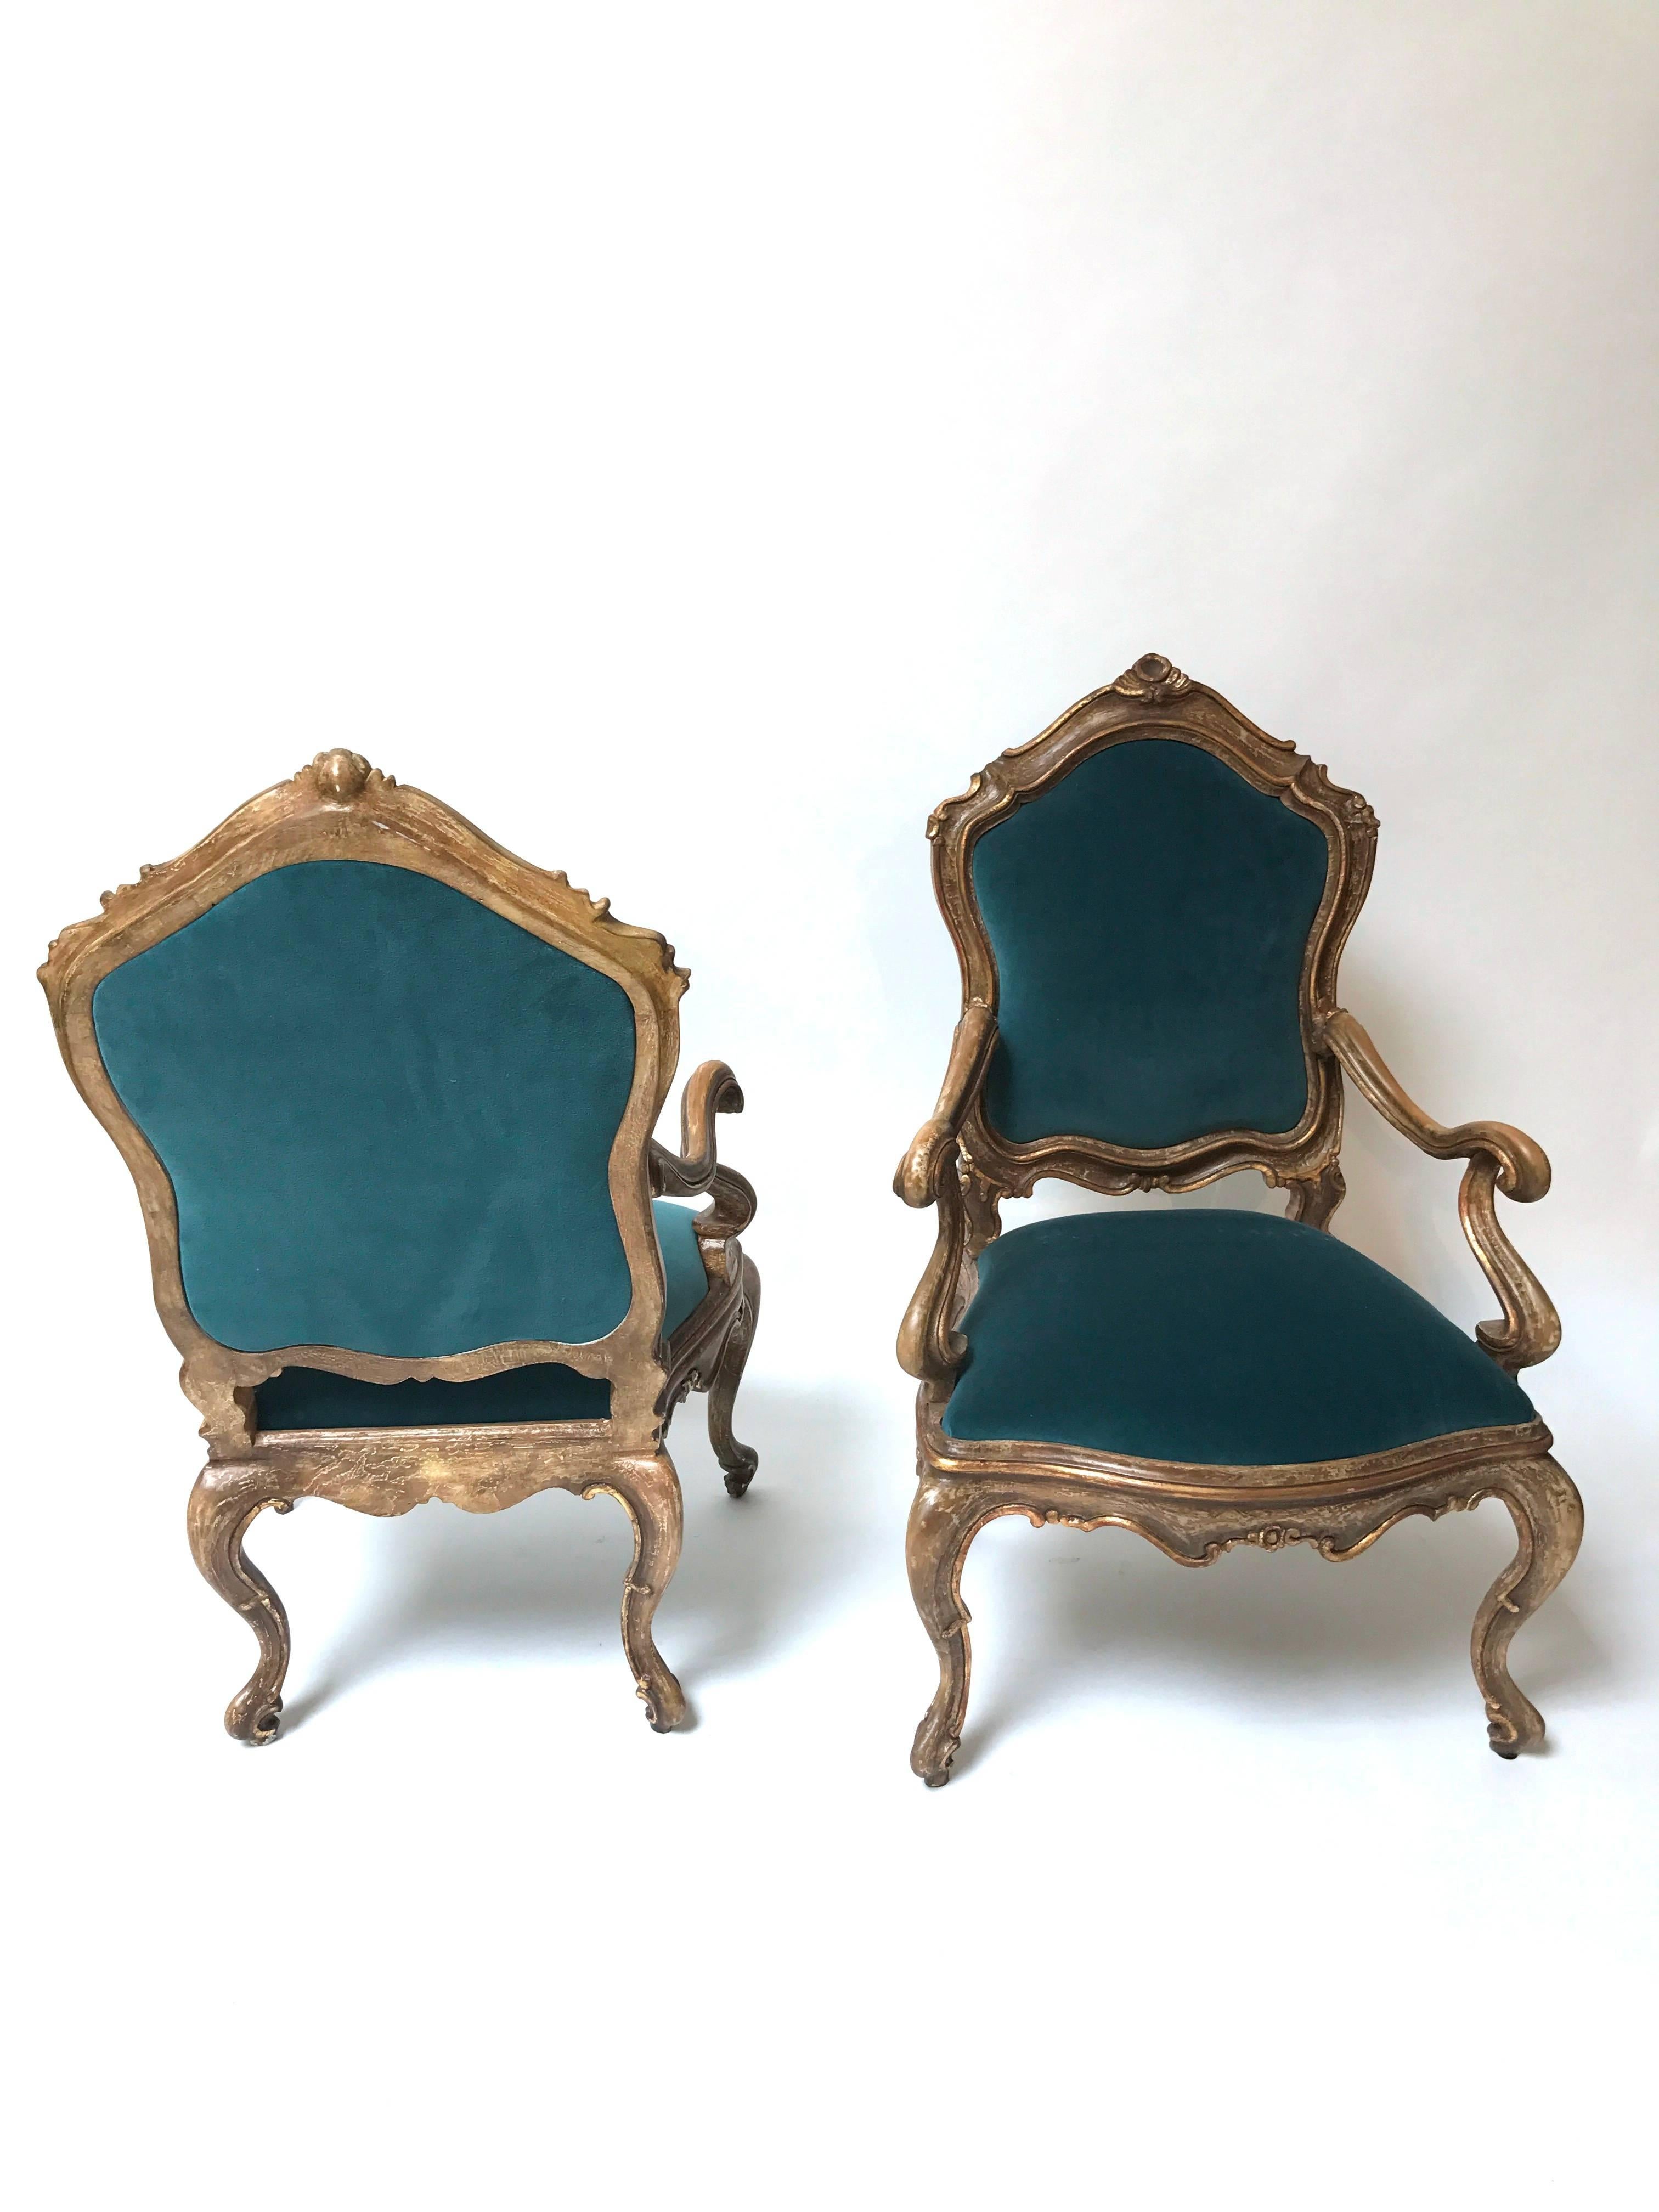 Pair of generous hand-carved custom Louis XV style Venetian rubbed gilt armchairs (copied after an original Venetian chair, circa 1740).